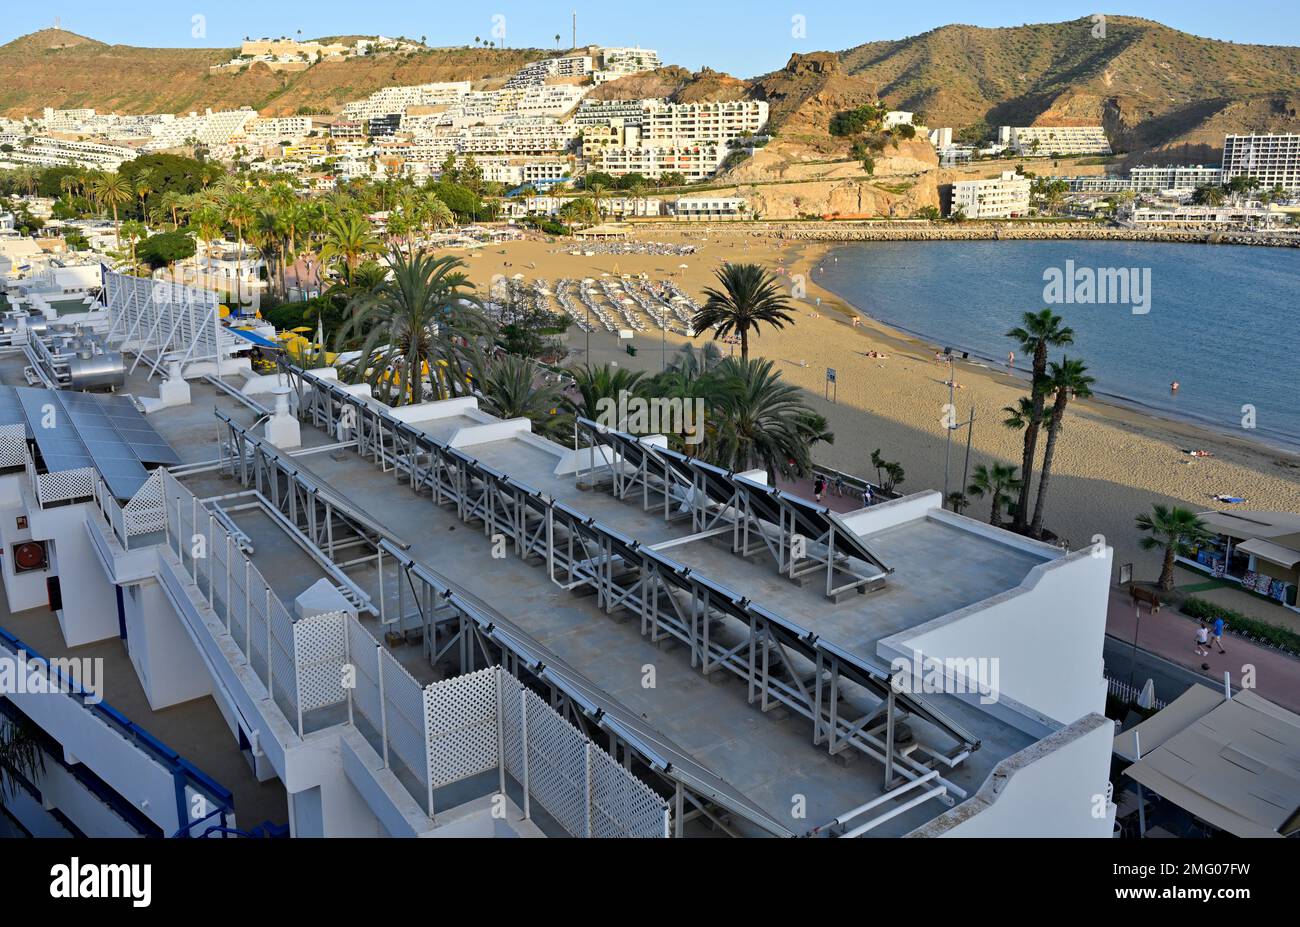 Solar thermal panels on rooftop of hotel overlooking Playa de Puerto Rico sandy beach and seafront, Arguineguín, Gran Canaria Stock Photo